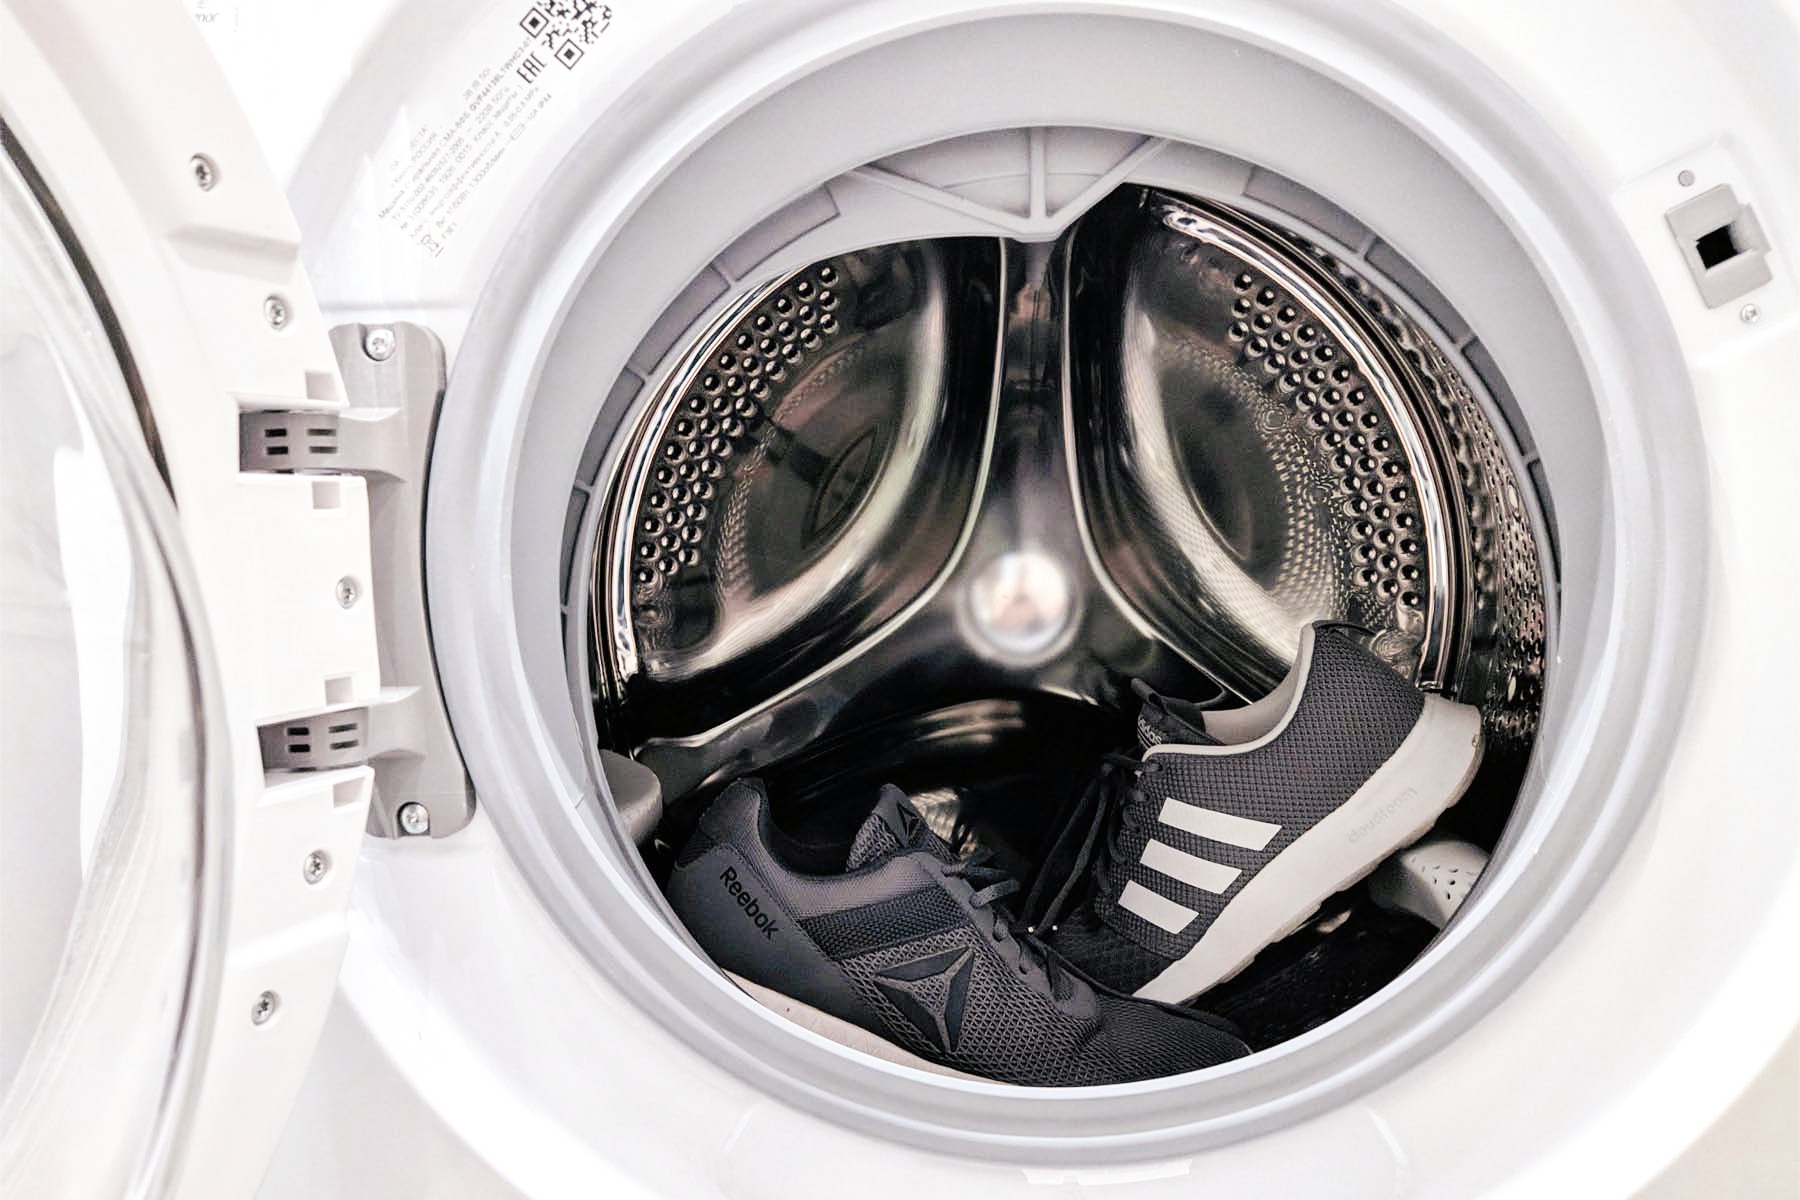 Leander's Trusted GE Washer Repair Experts